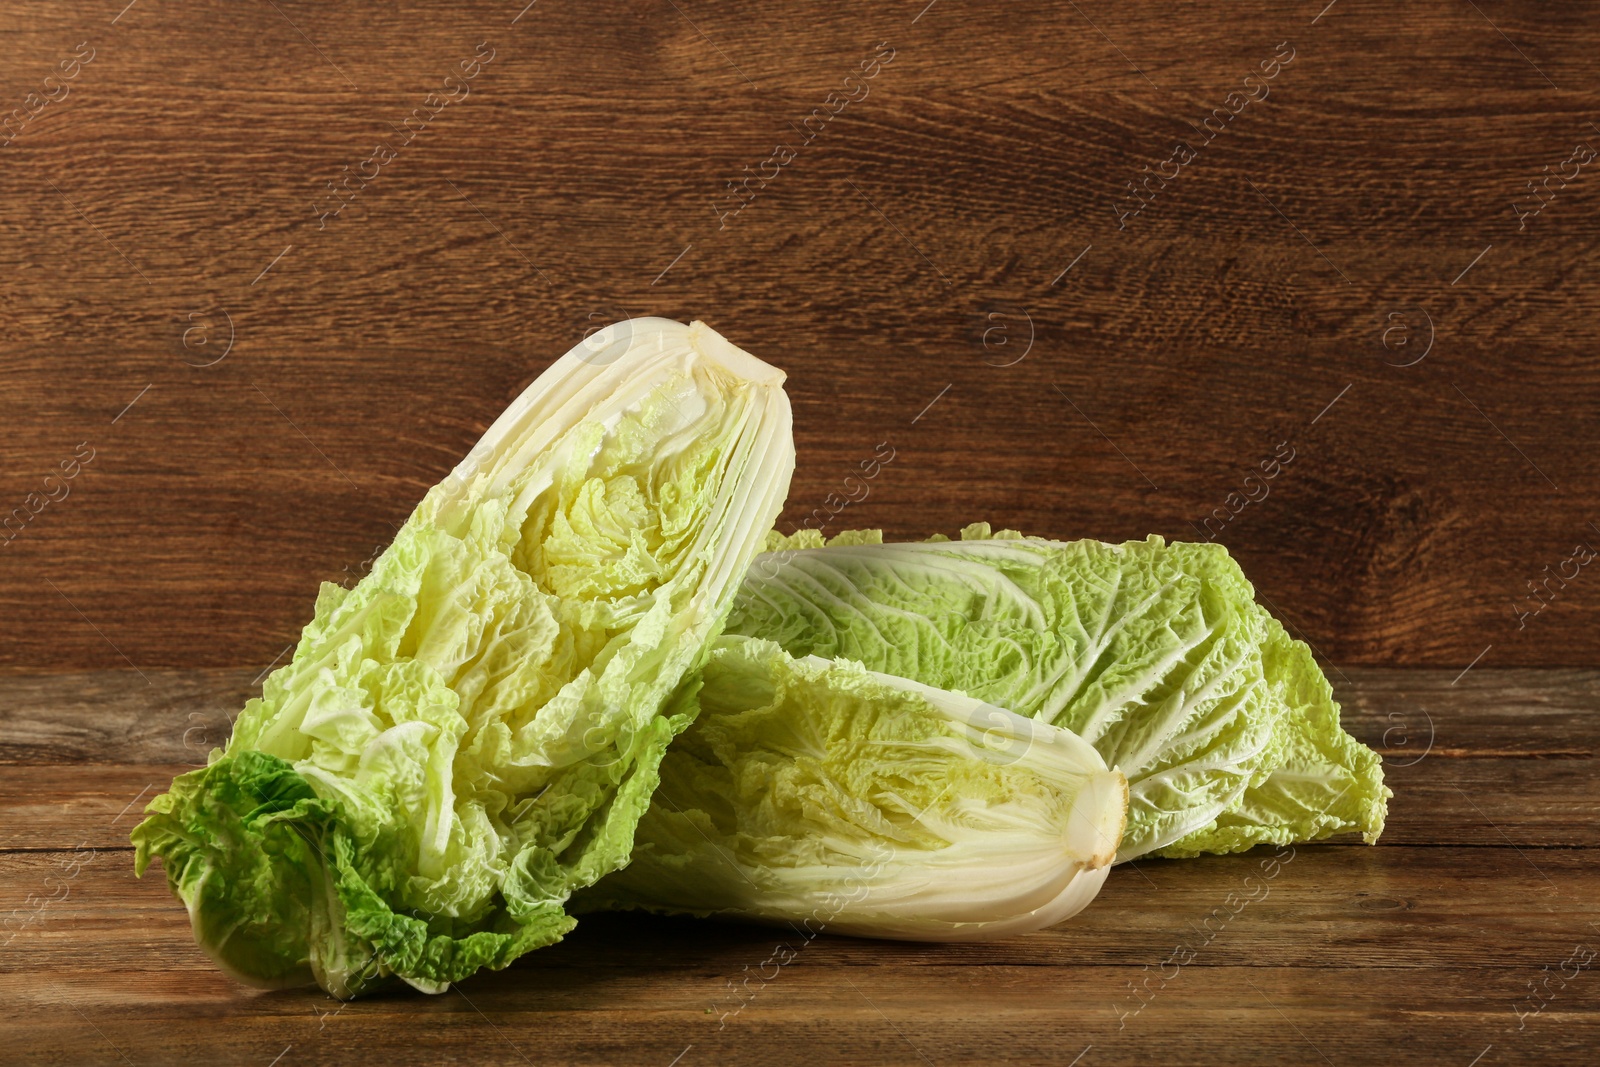 Photo of Cut fresh ripe Chinese cabbage on wooden table